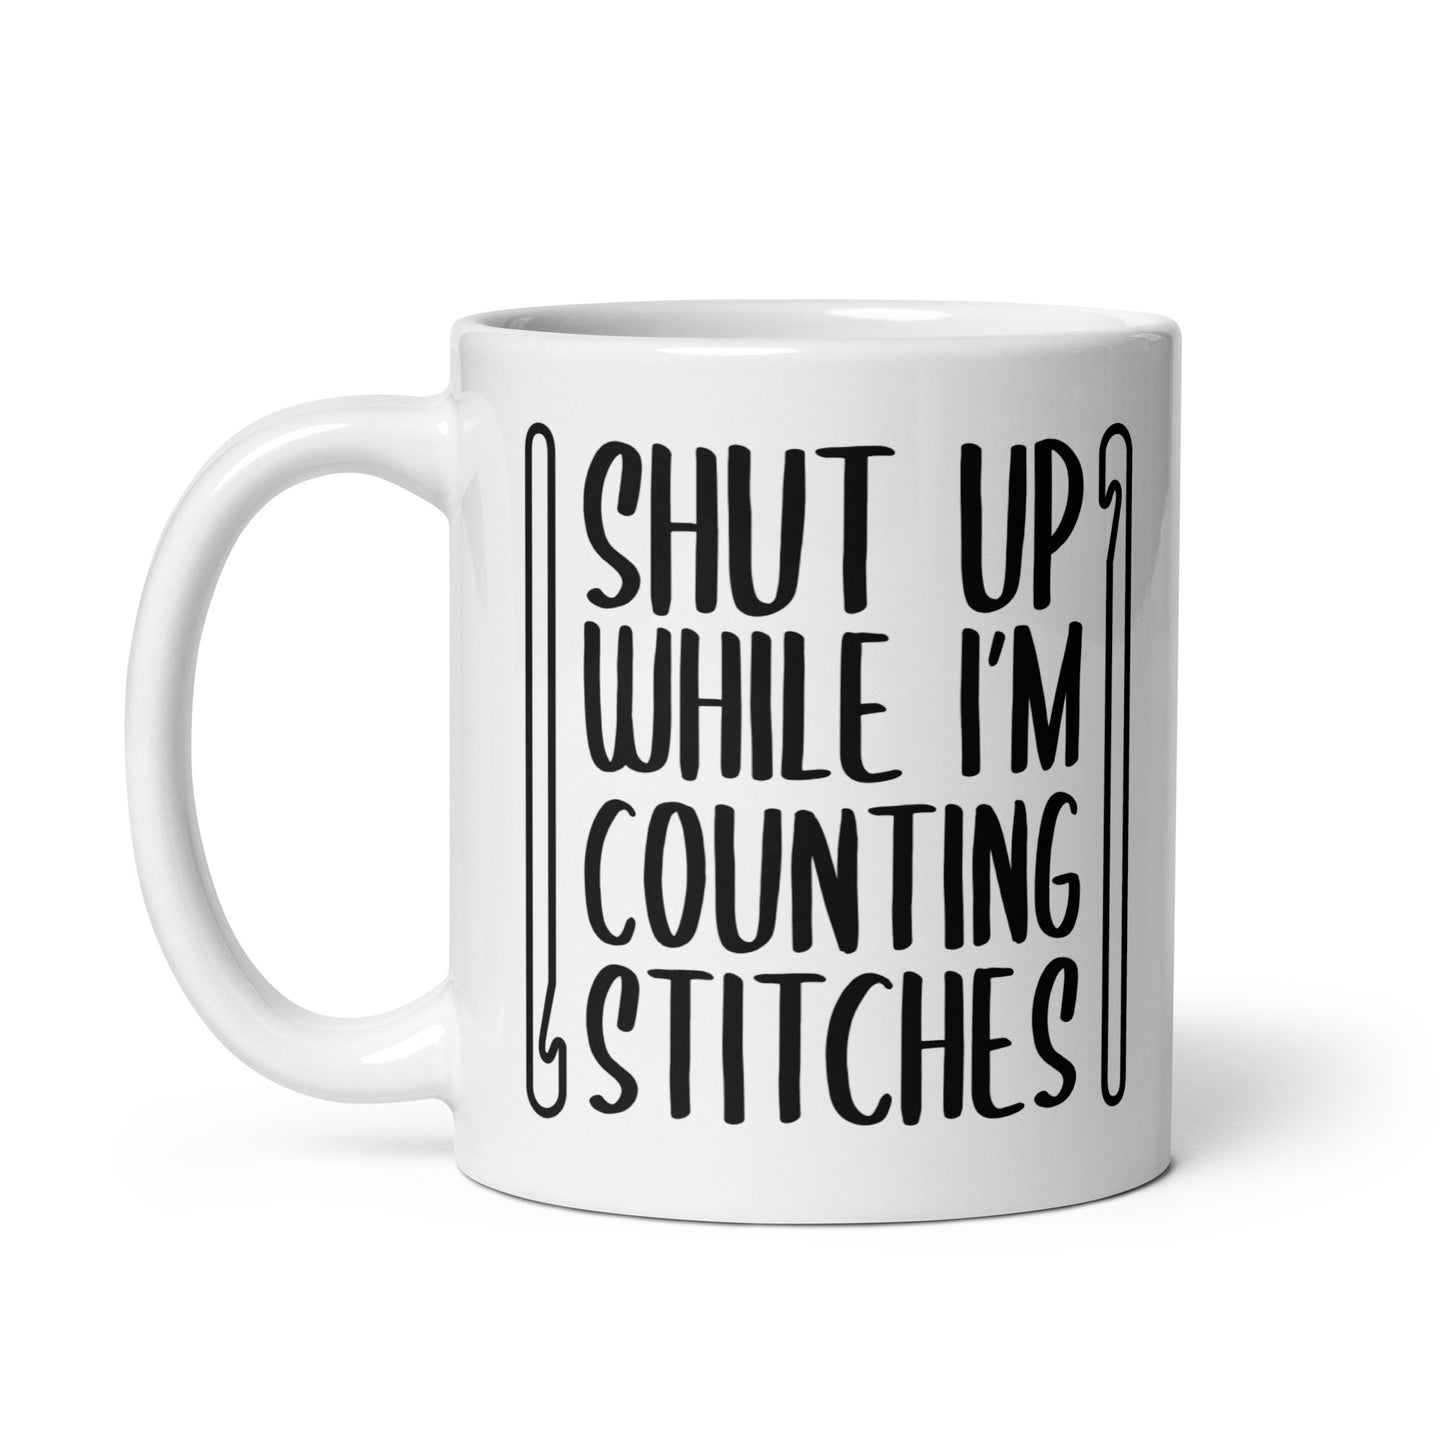 A white 11 ounce, ceramic mug featuring black text that reads "Shut up while I'm counting stitches." The text is framed by a crochet hook to the left and right.